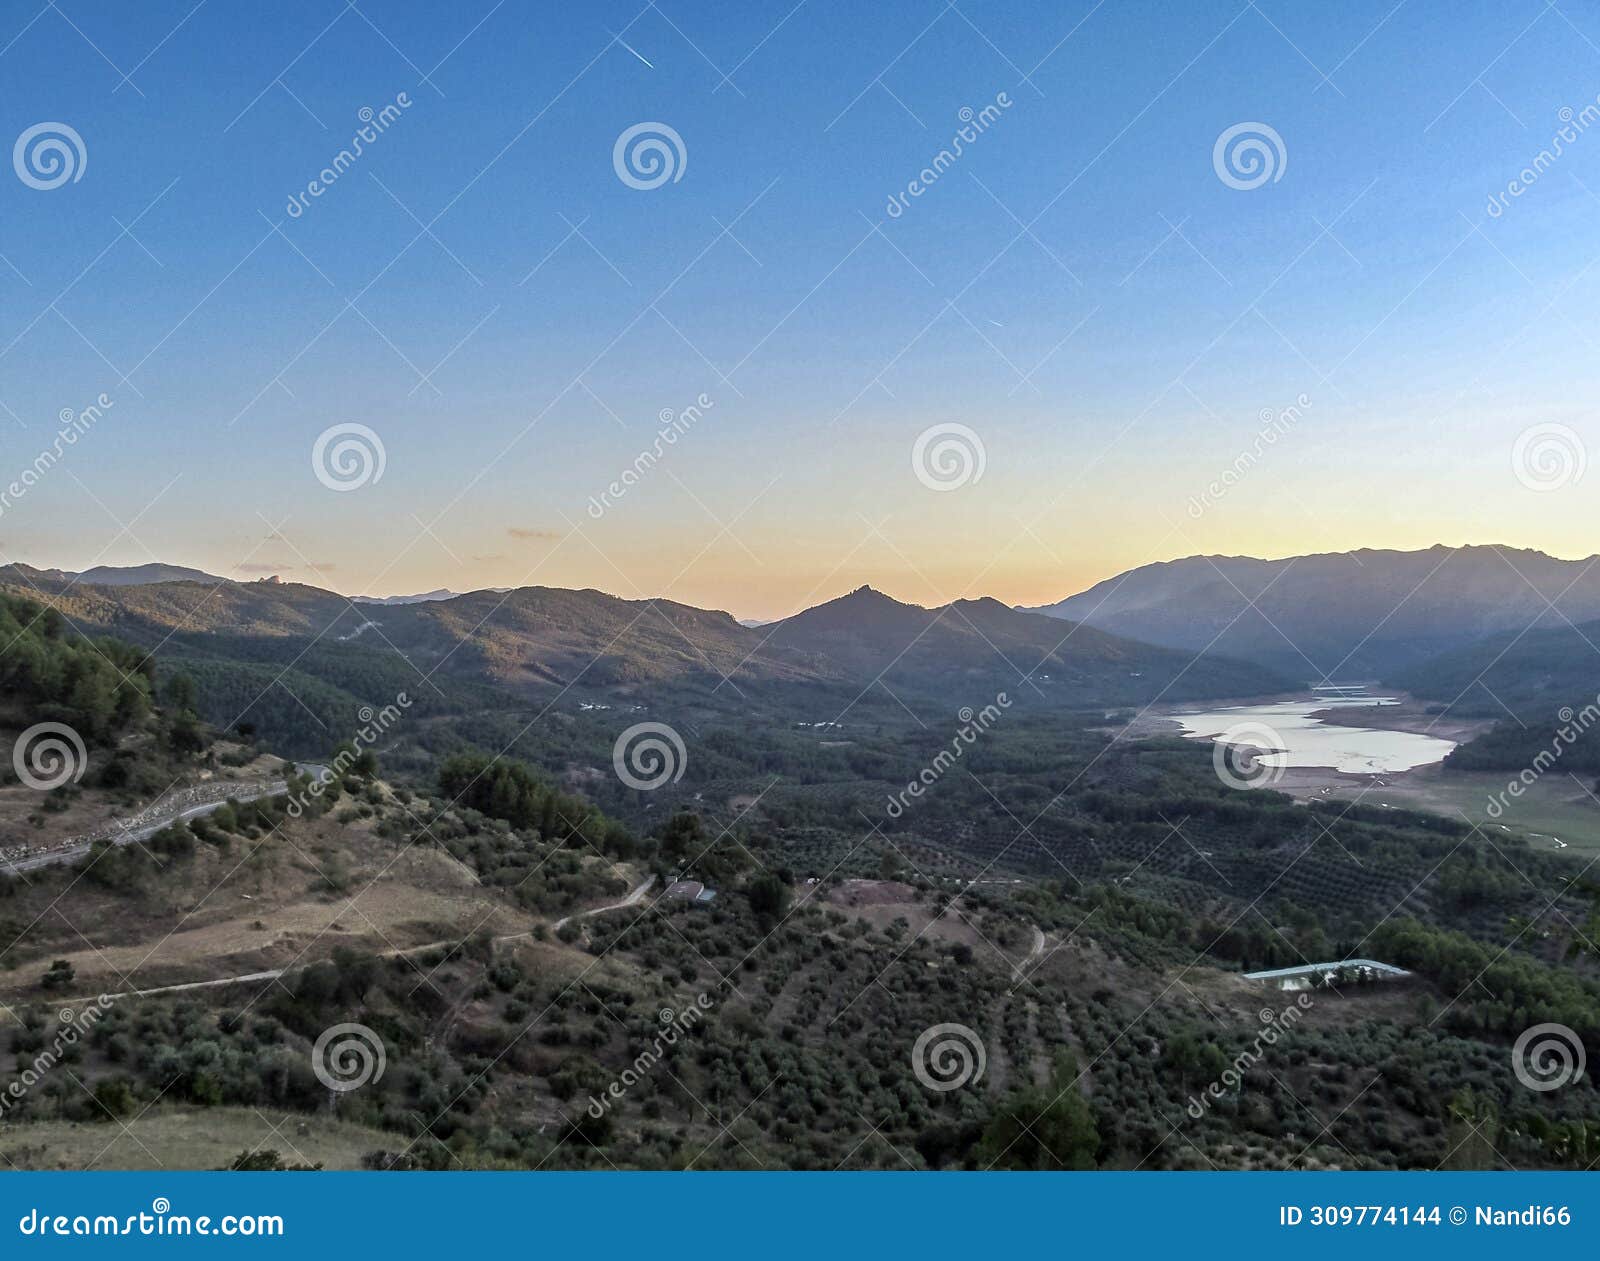 tranco reservoir from the aguilon viewpoint. segura ovens, jaen, spain.